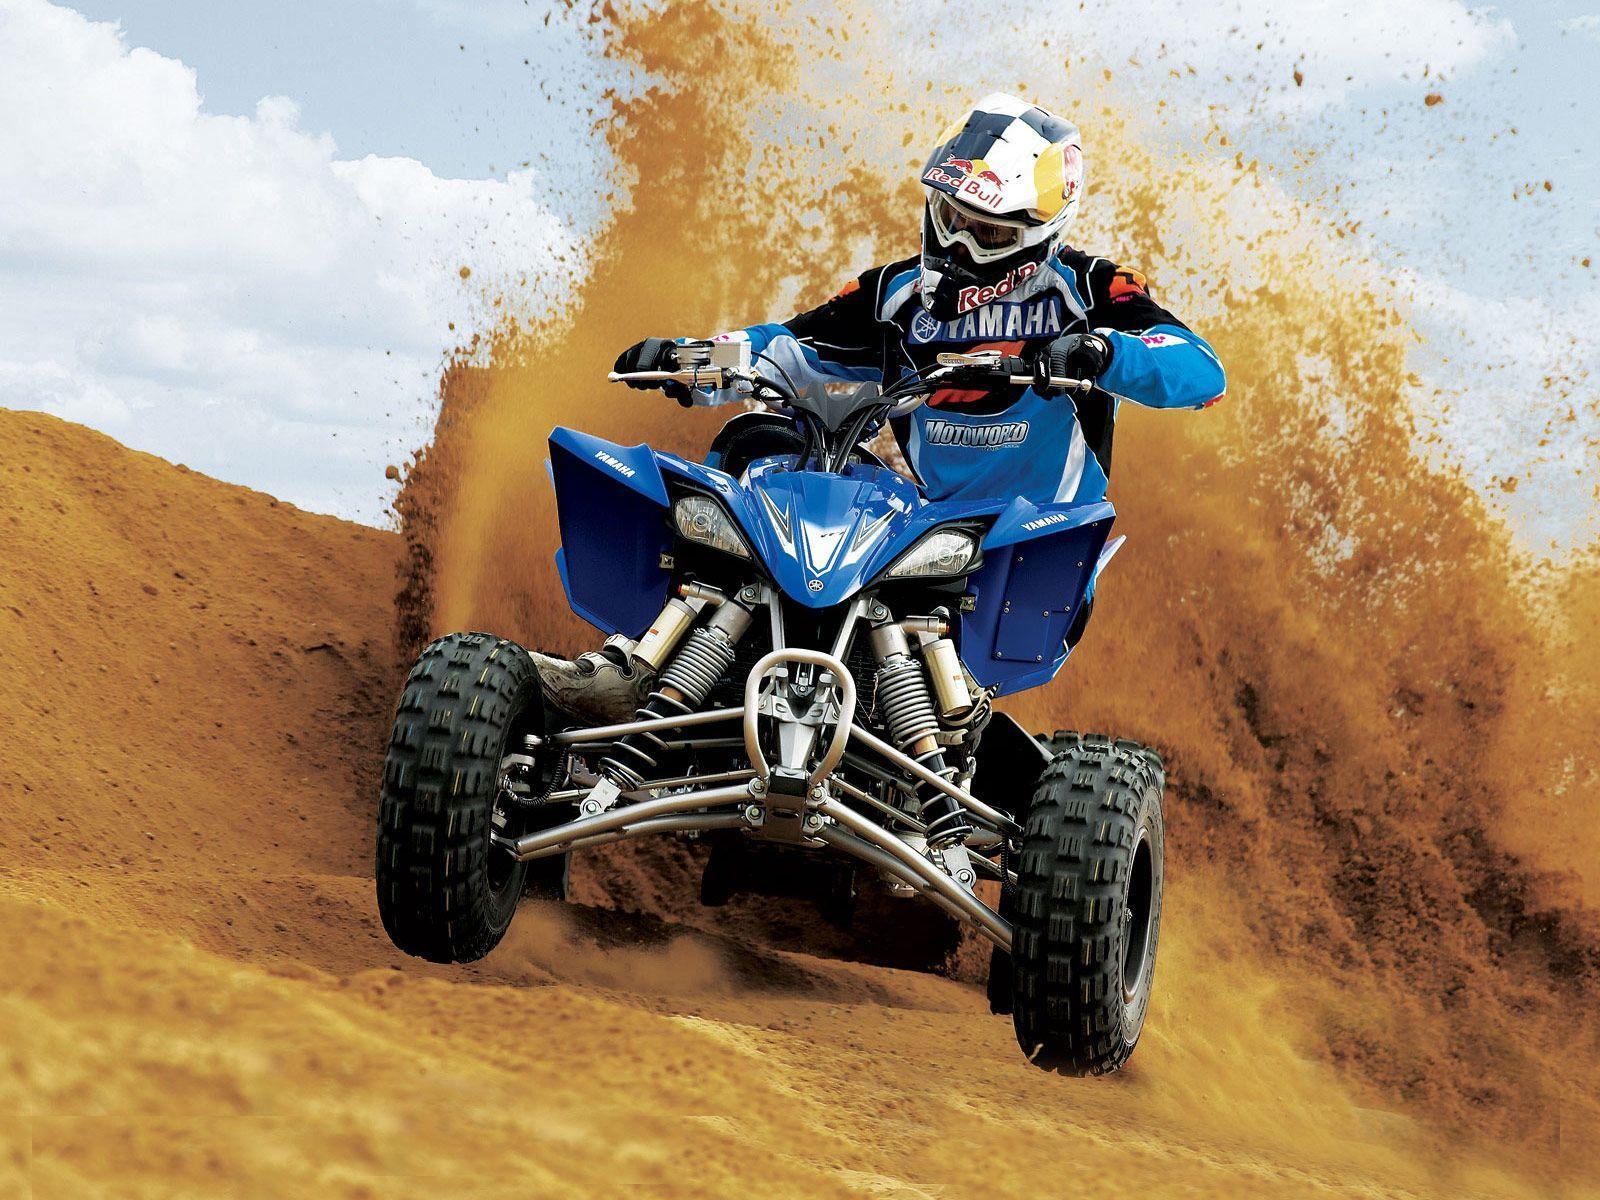 Atv Wallpapers, Atv Wallpapers For Free Download, Fungyung